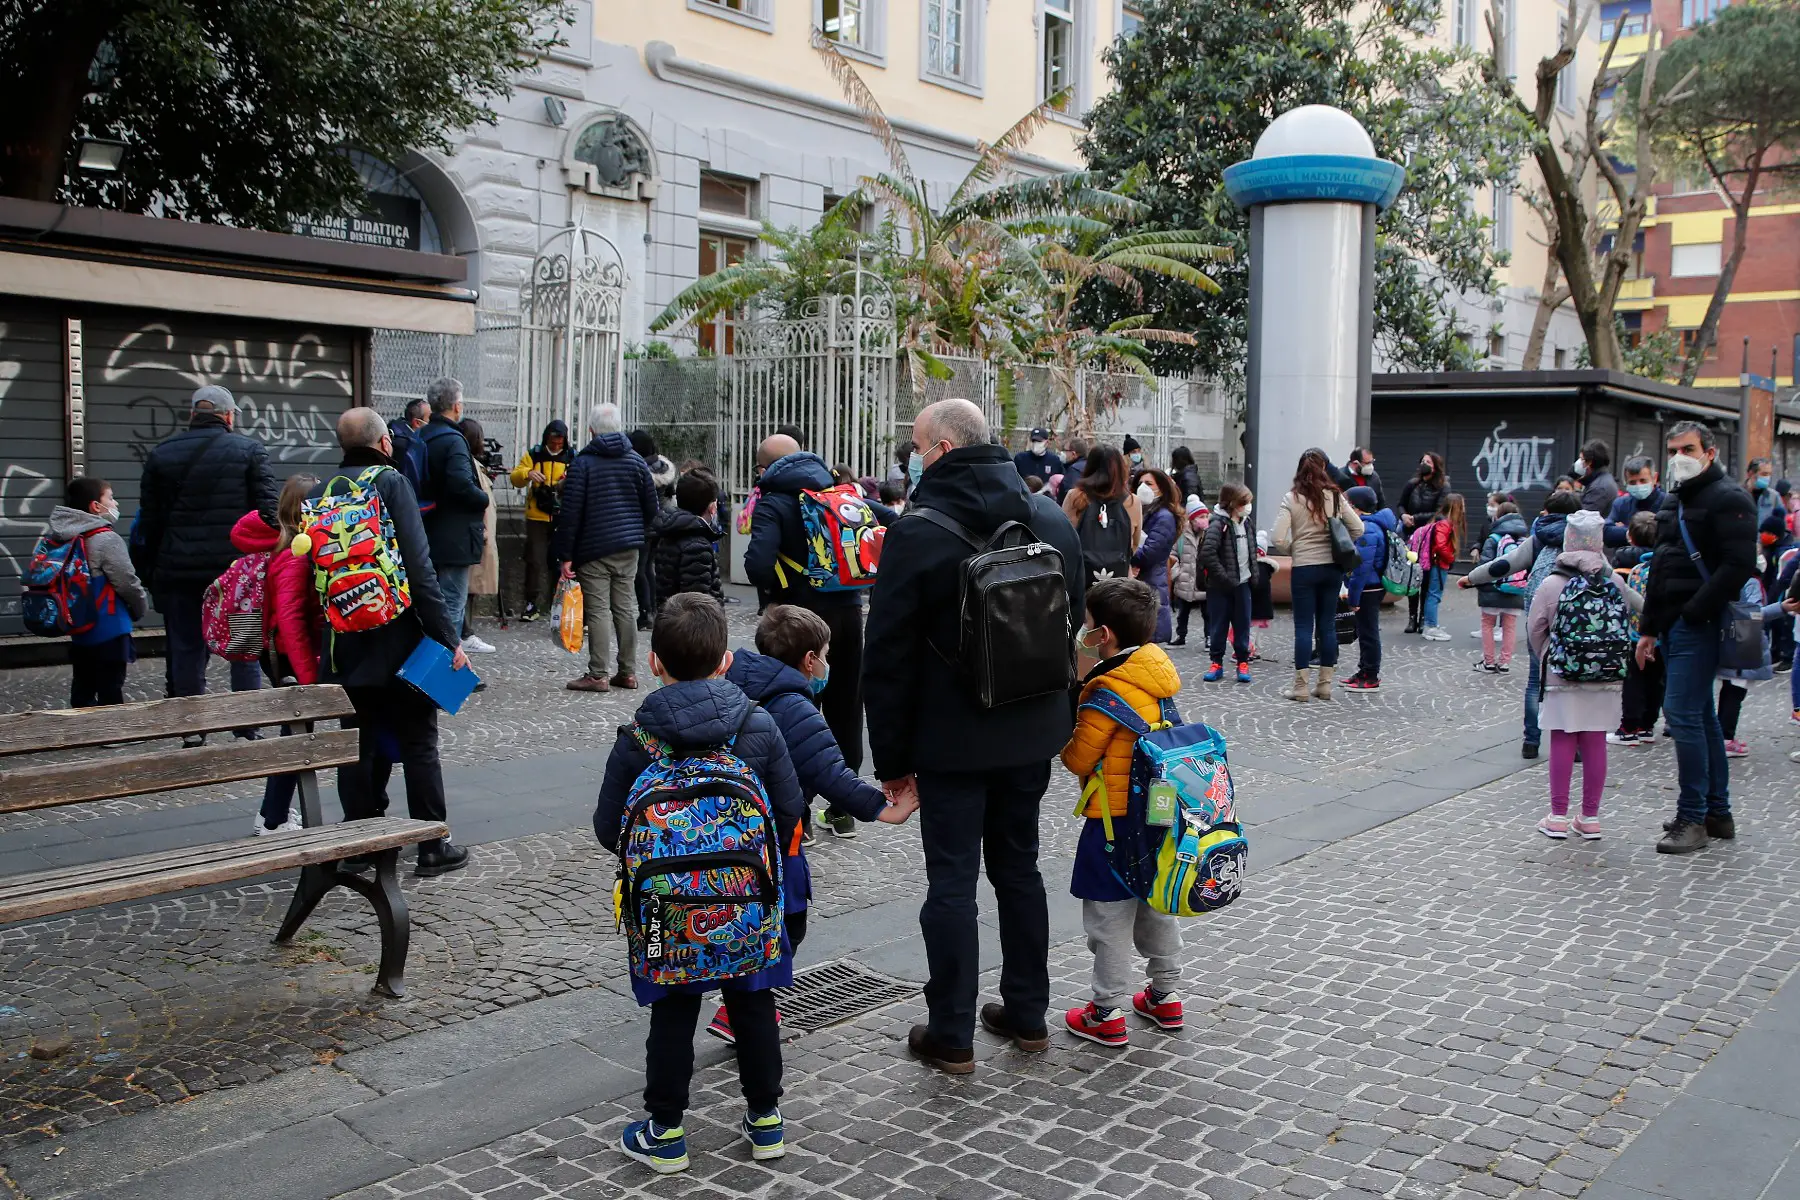 Pupils and parents wearing protective masks next to the entrance of an primary school in Naples, Italy.